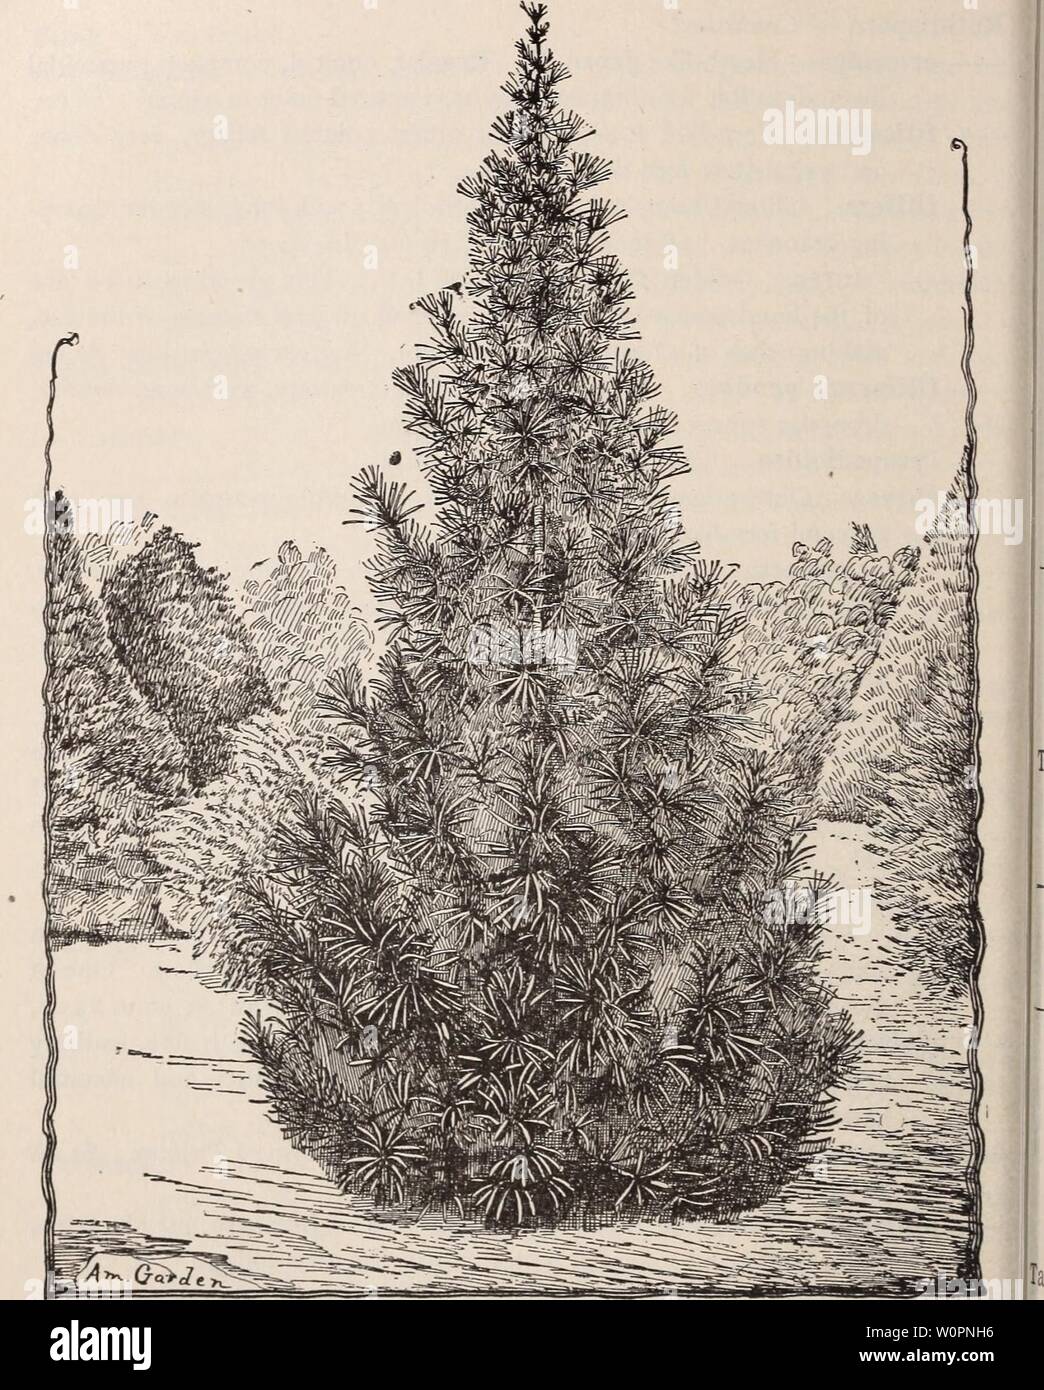 Archive image from page 99 of Descriptive catalogue of trees, shrubs,. Descriptive catalogue of trees, shrubs, vines and plants of the Shady Hill Nurseries descriptivecatal1893shad Year: 1893  74    SCIADOPITYS VERTICILLATA. Sciadopitys verticillata. Umbrella Pine. Perfectly upright trunk with horizontal branches, bearing whorls of shining green, very broad, flat needles, lined with white on the under side. These needles, by their remarkable size, and still more remarkable arrangement in umbrella- like tufts, and their leathery texture, give this tree the most unique Stock Photo